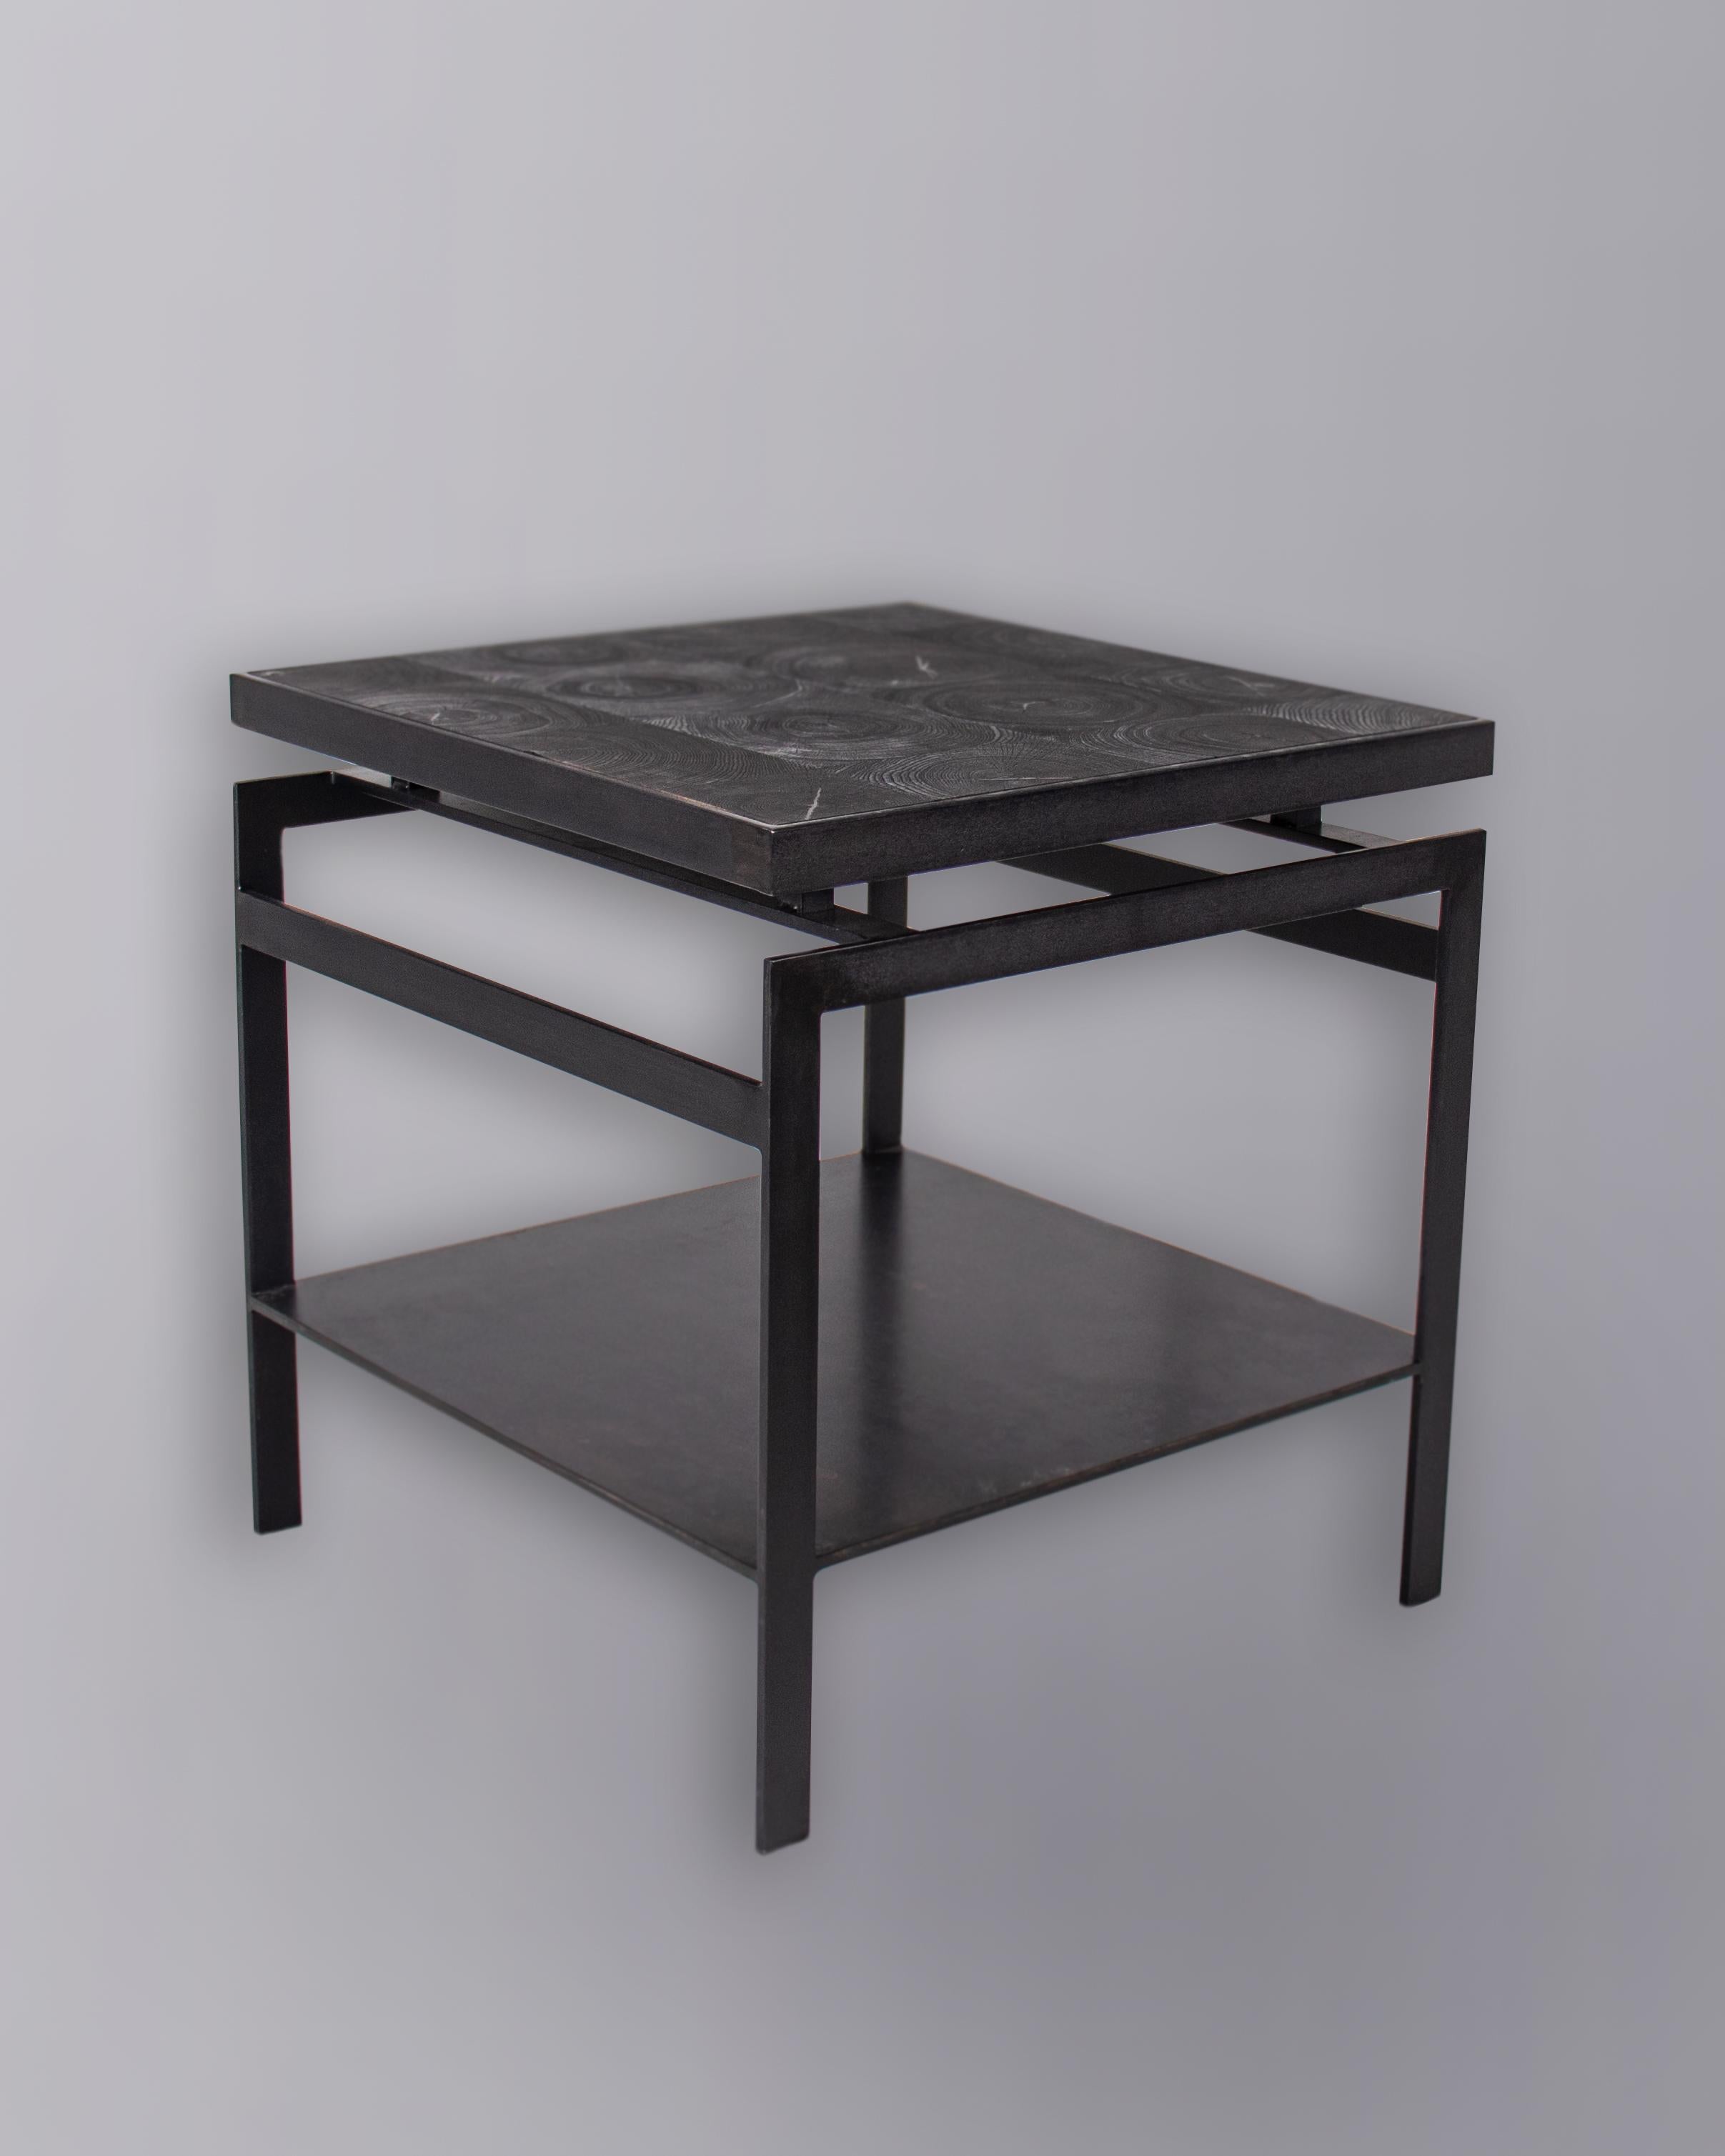 Minimalist end table made from solid black steel with ebonized black oak top.

Designed by Brendan Bass for the Vision and Design Collection, by using high quality materials and textures. All materials are sourced from local vendors throughout the